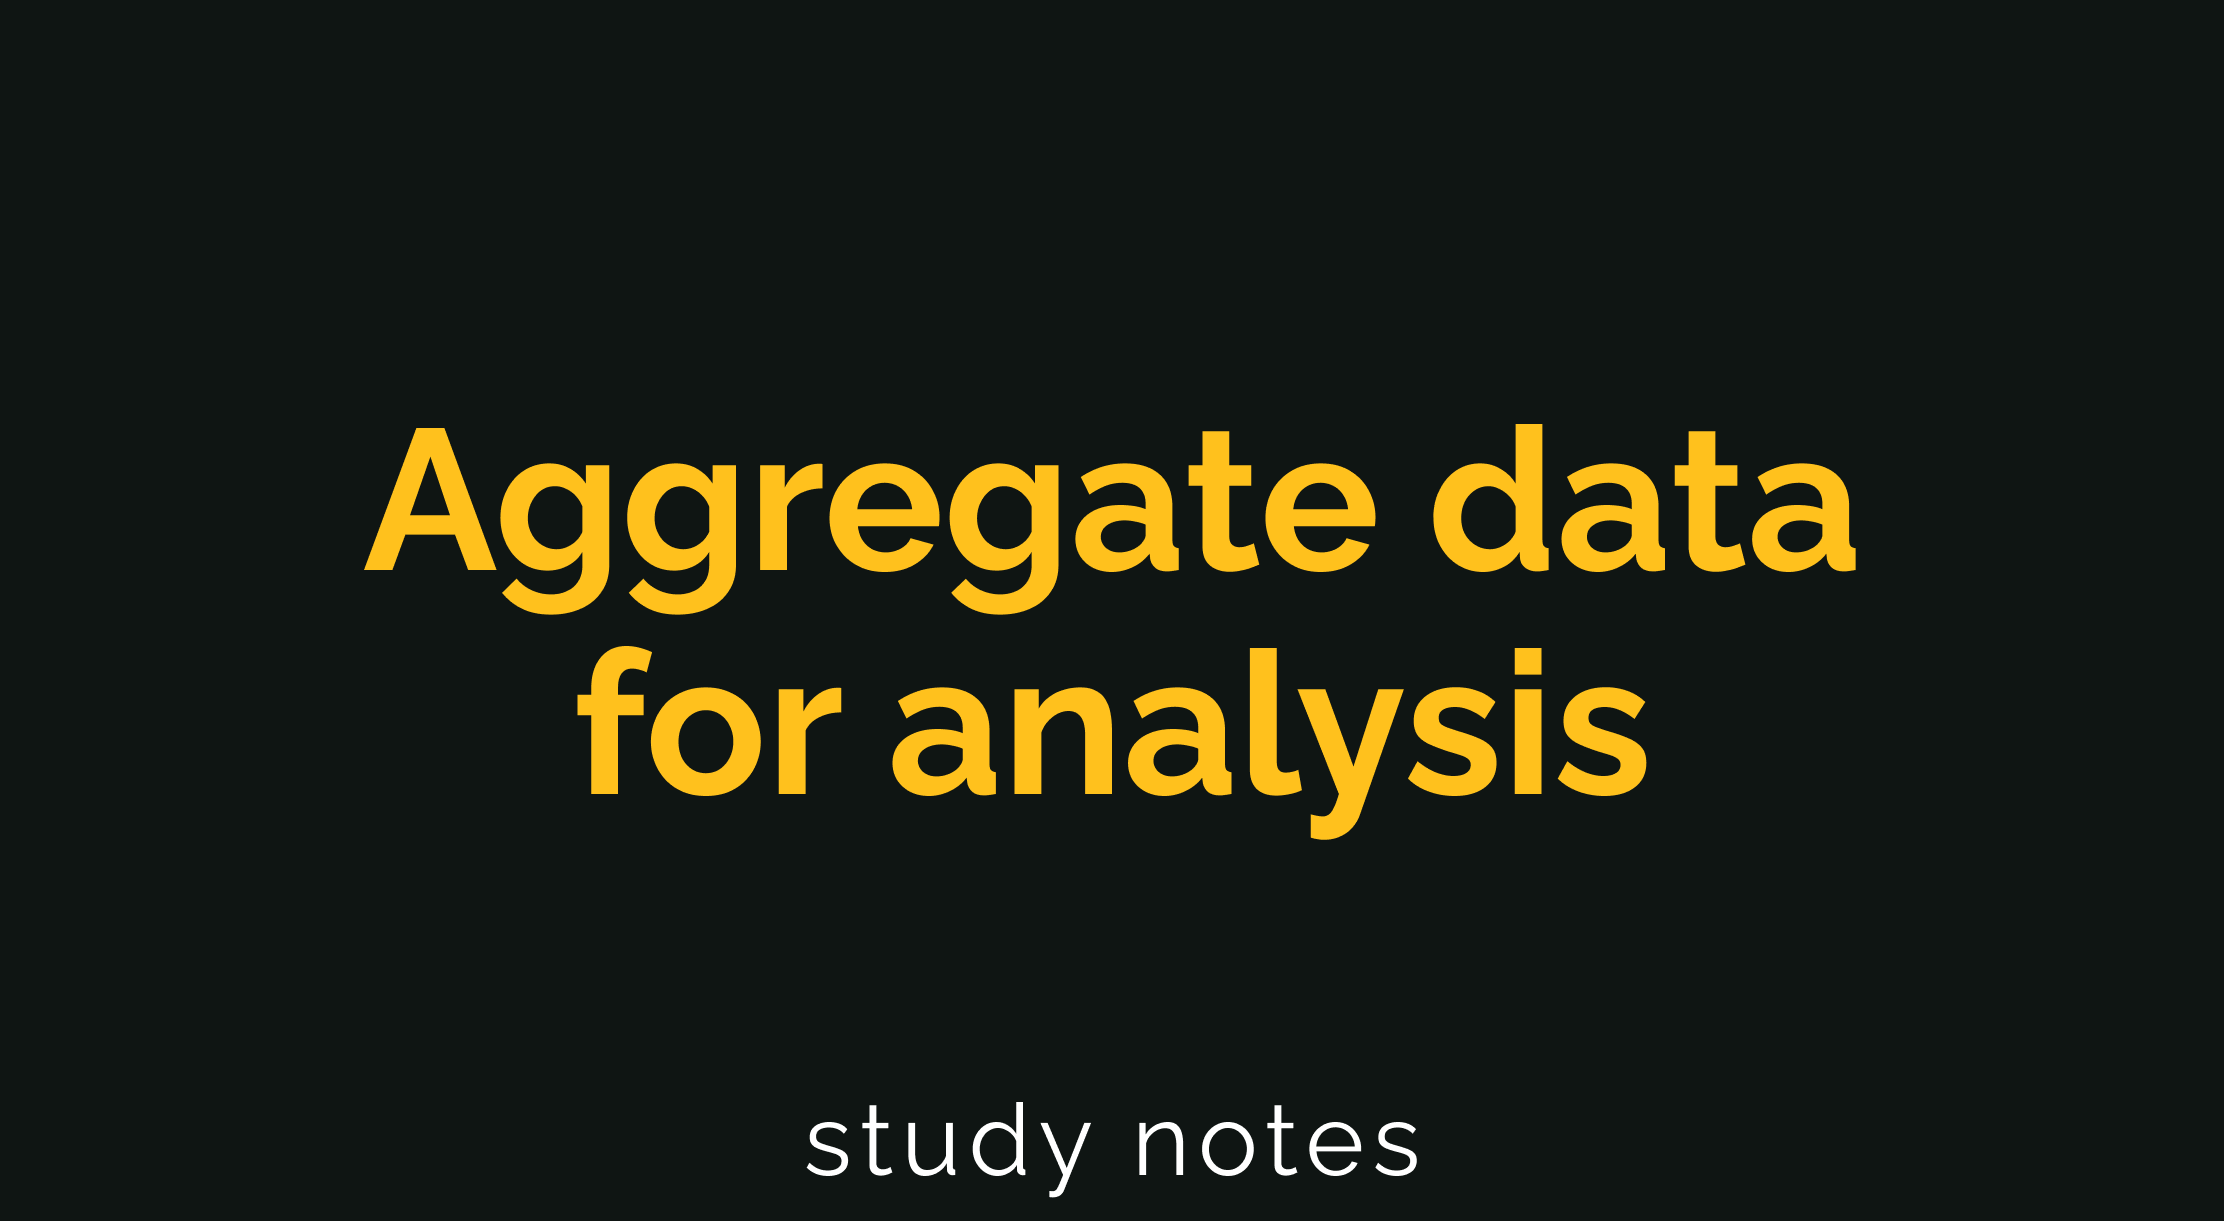 Aggregate data for analysis